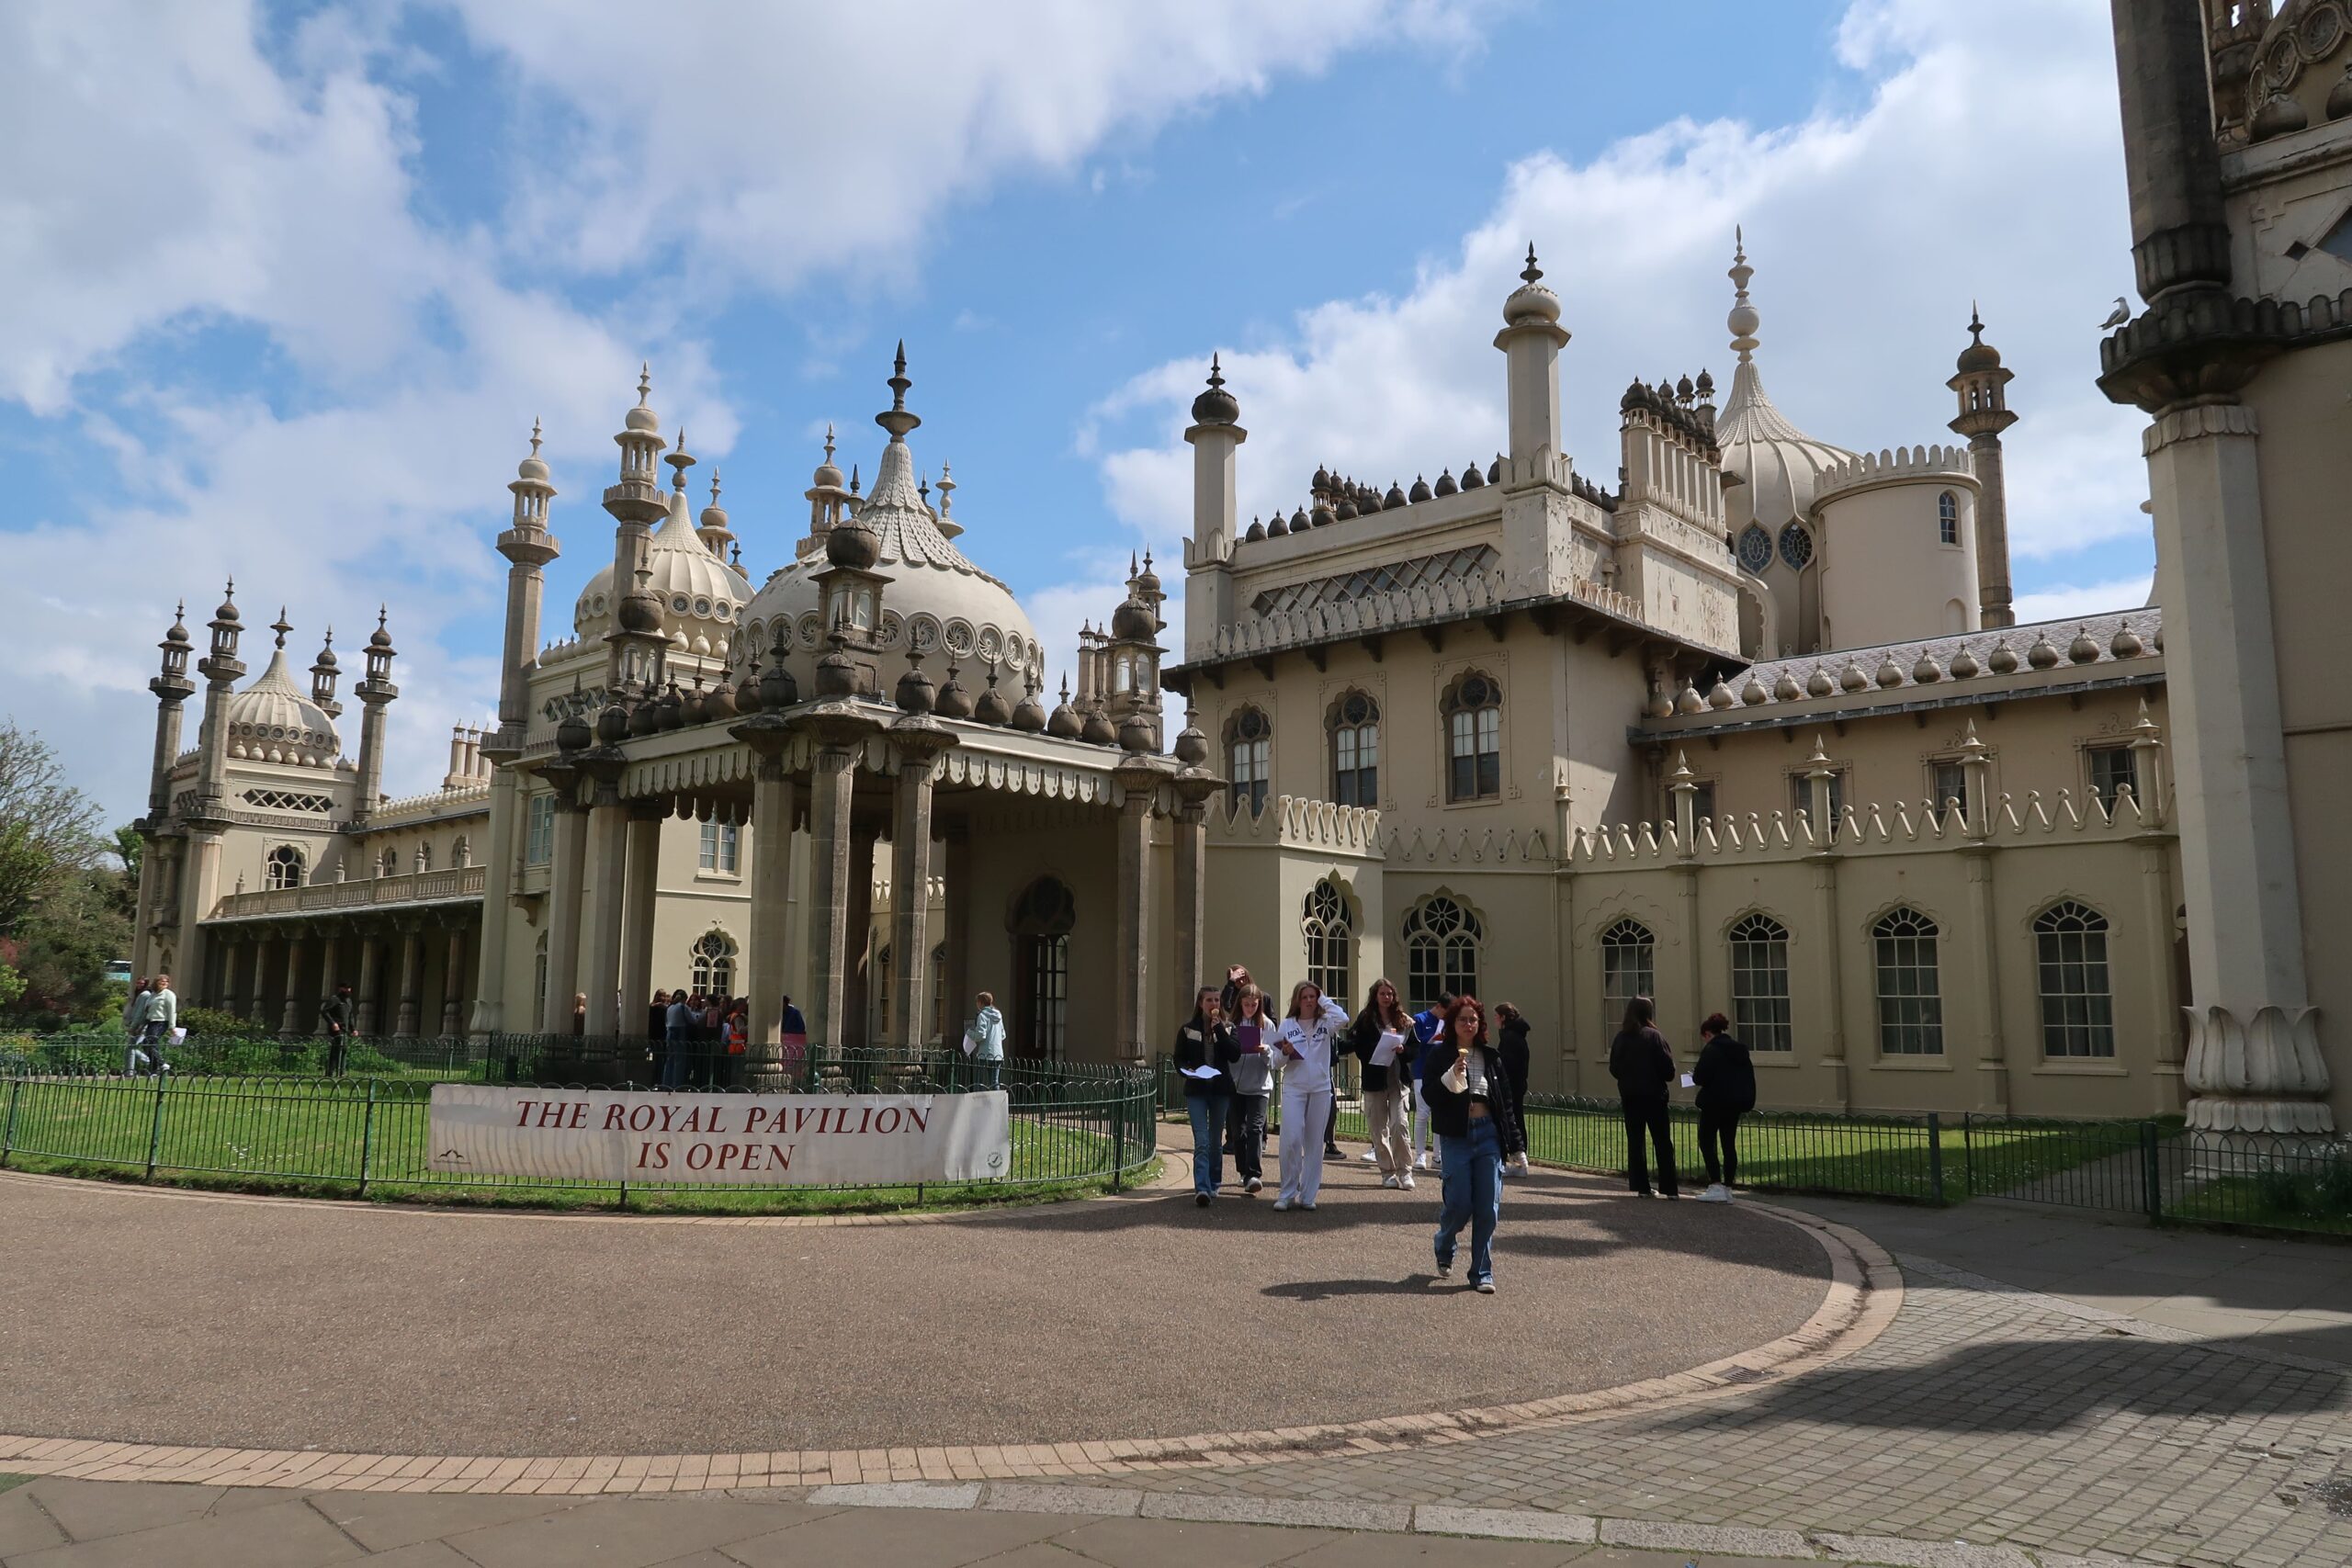 brighton Royal Pavilion things to see and do is it worth visiting photo spots first timer itinerary solo day trip from london